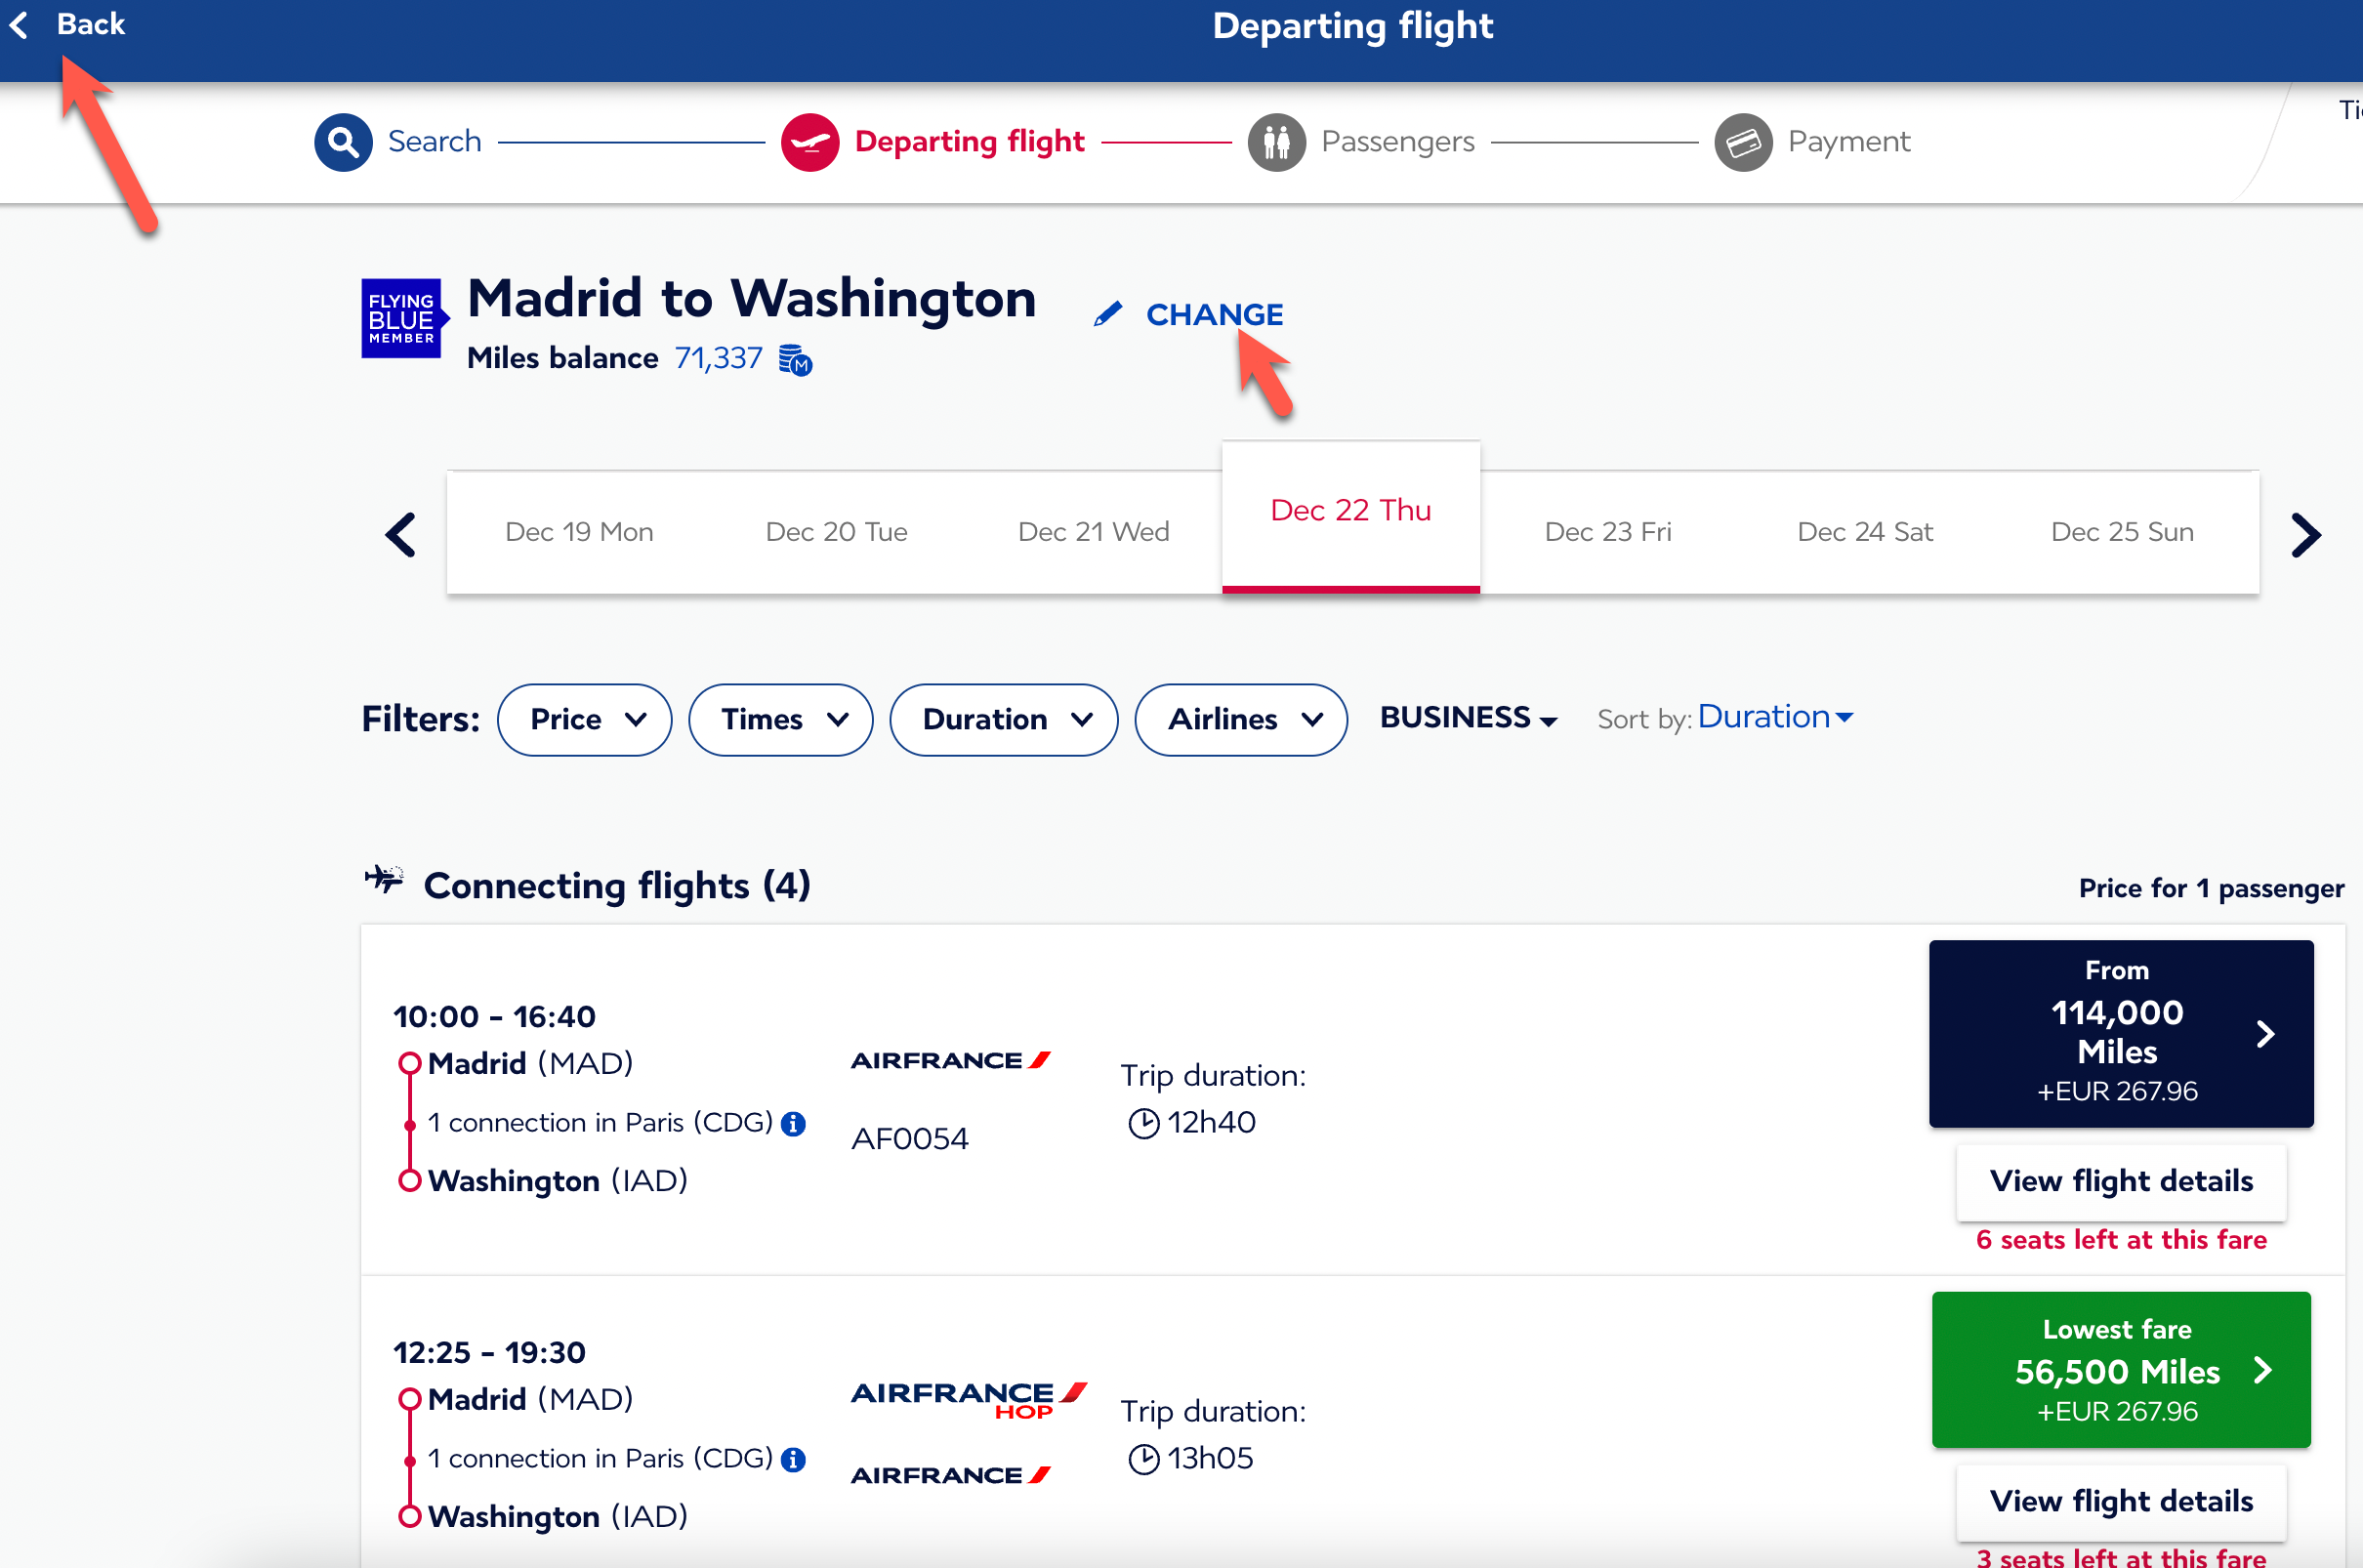 Booking a flight from MAD to IAD